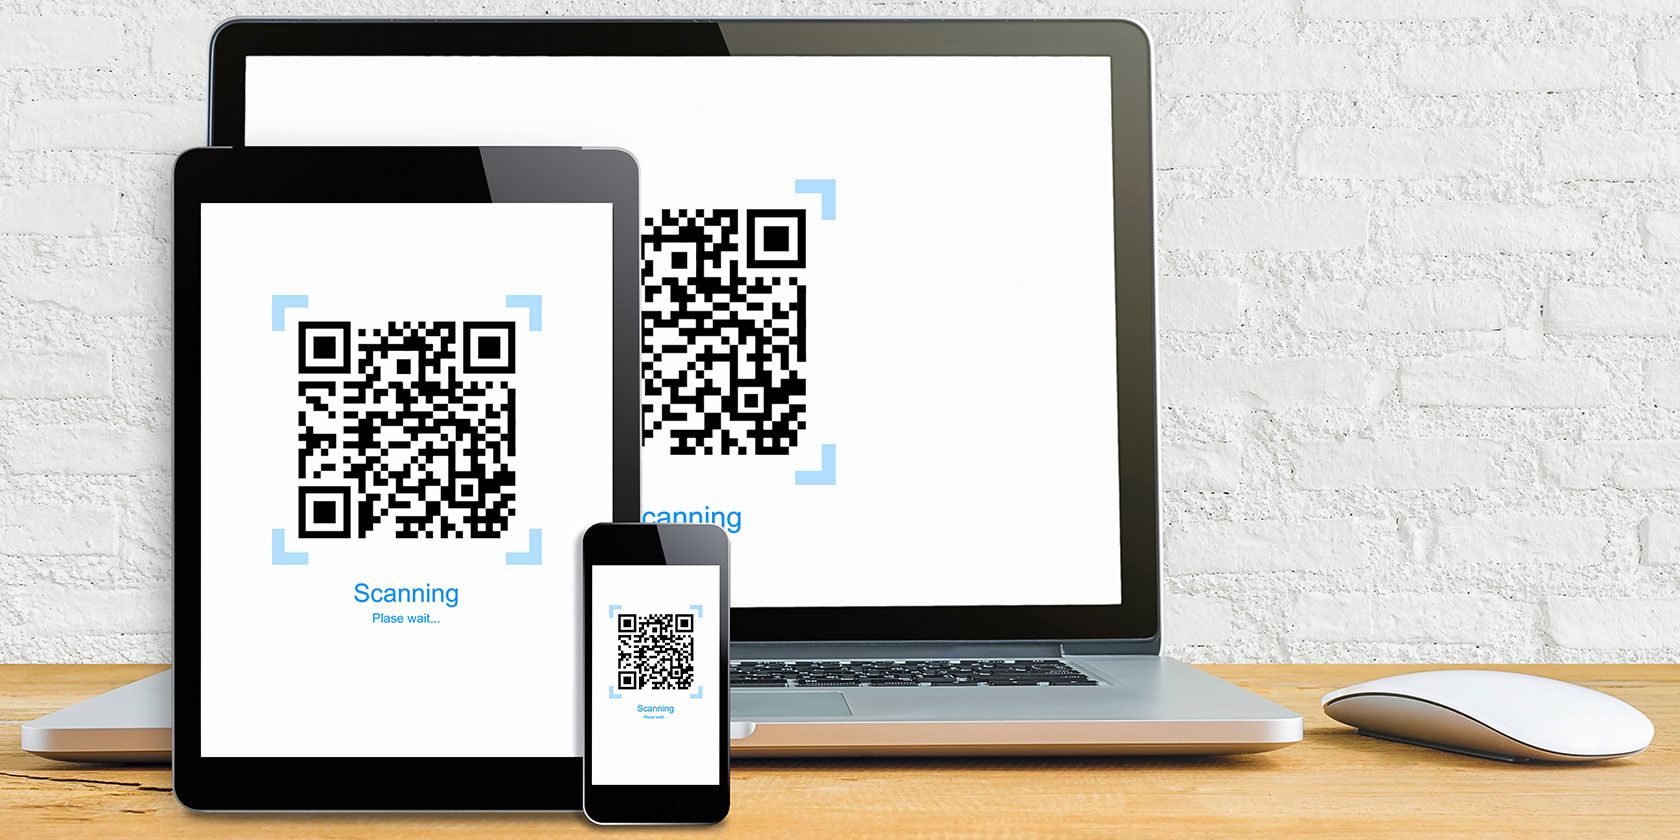 Laptop, tablet, and phone with QR codes showing